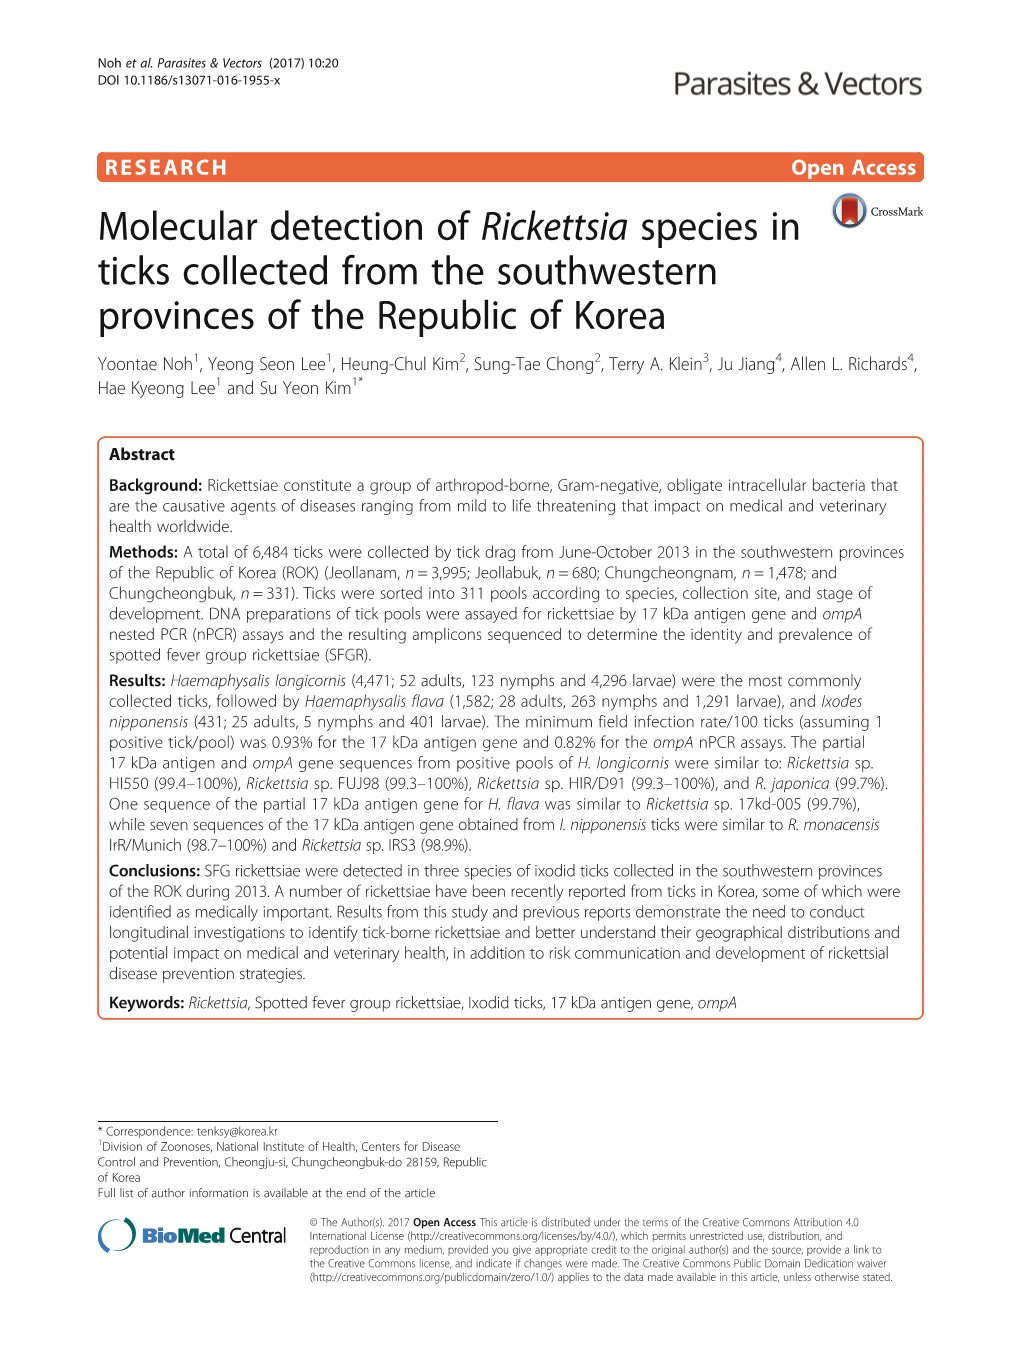 Molecular Detection of Rickettsia Species in Ticks Collected from The